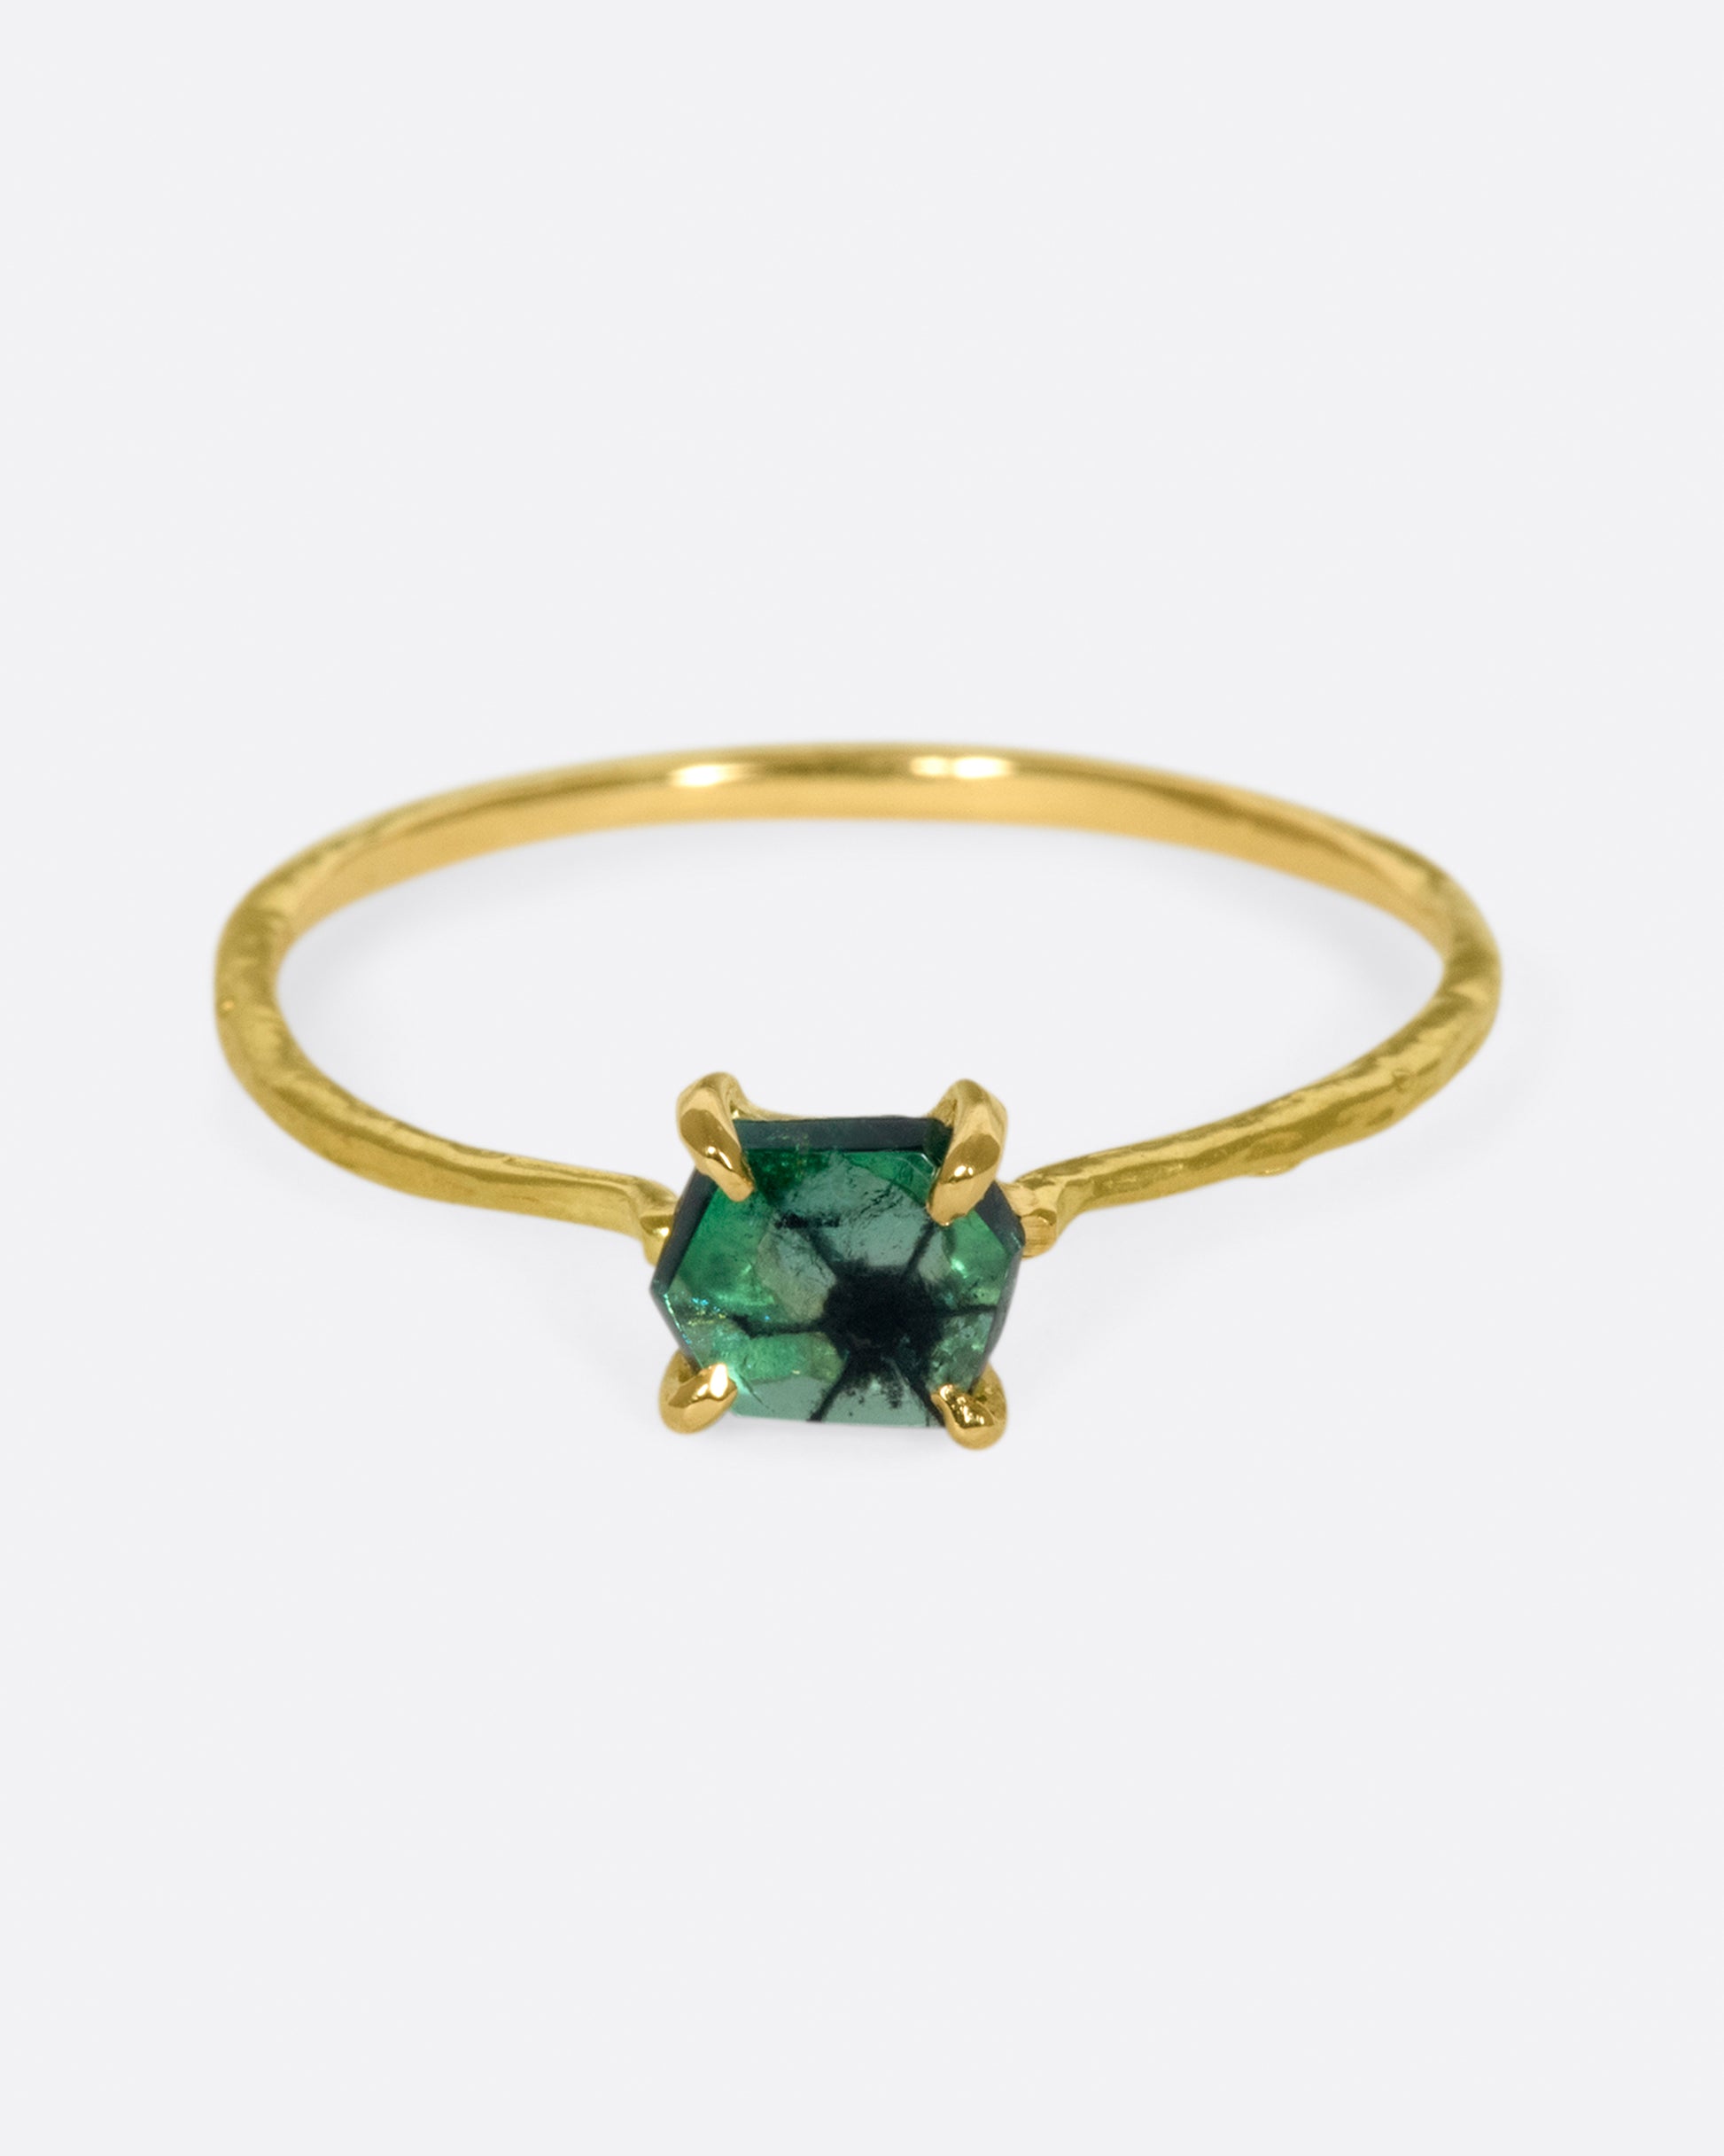 The hexagonal cut of complements the spoke-like pattern on the interior of this emerald.